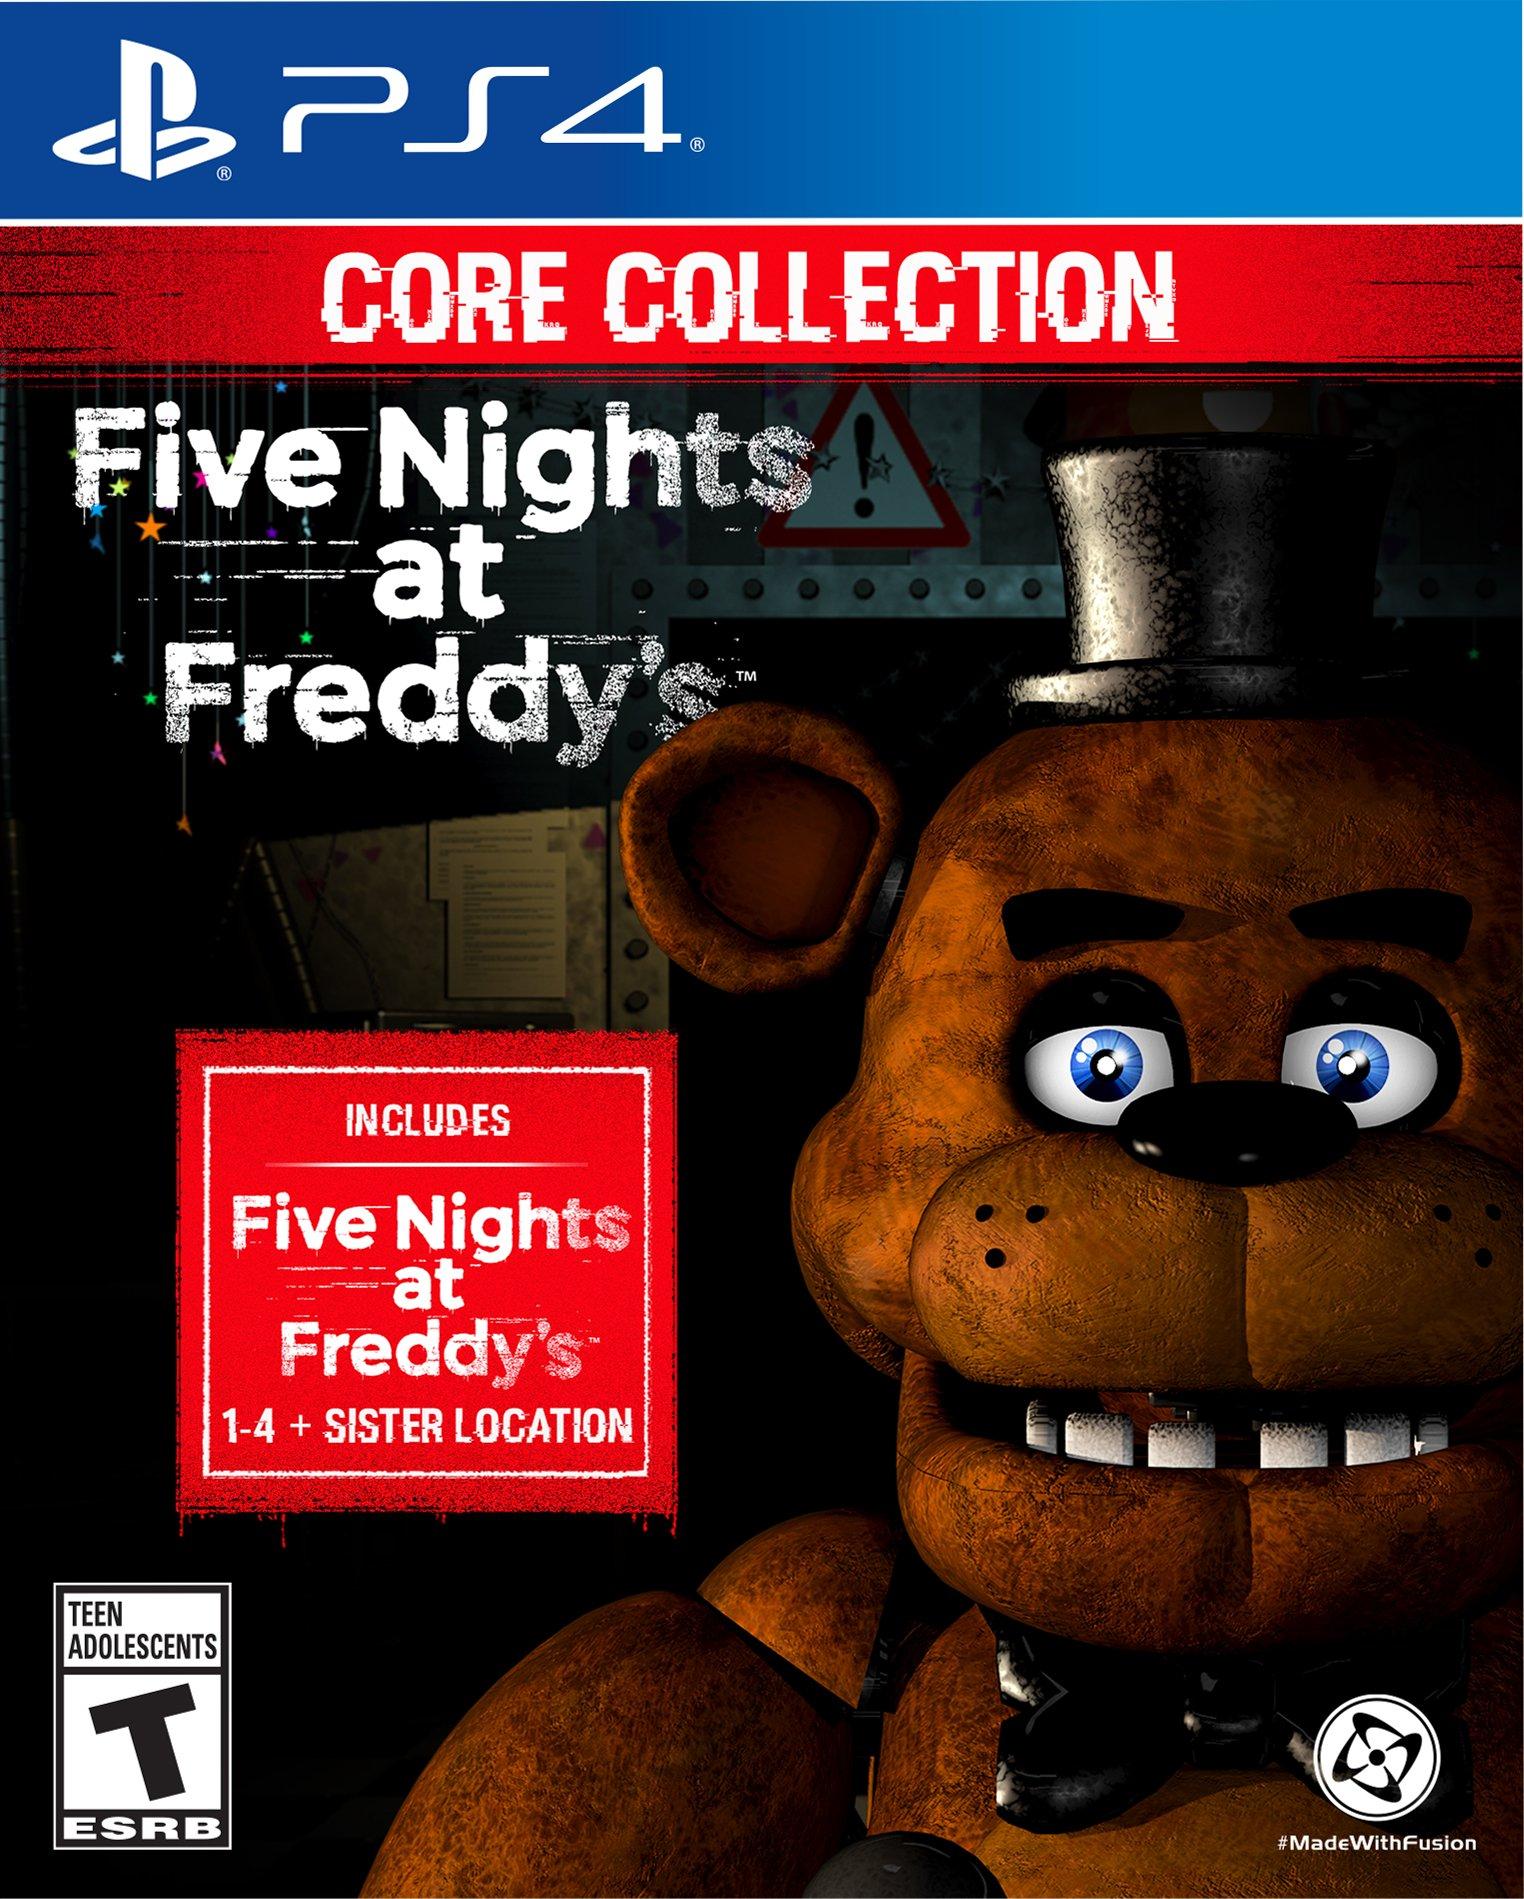 Five Nights At Freddys Core Collection